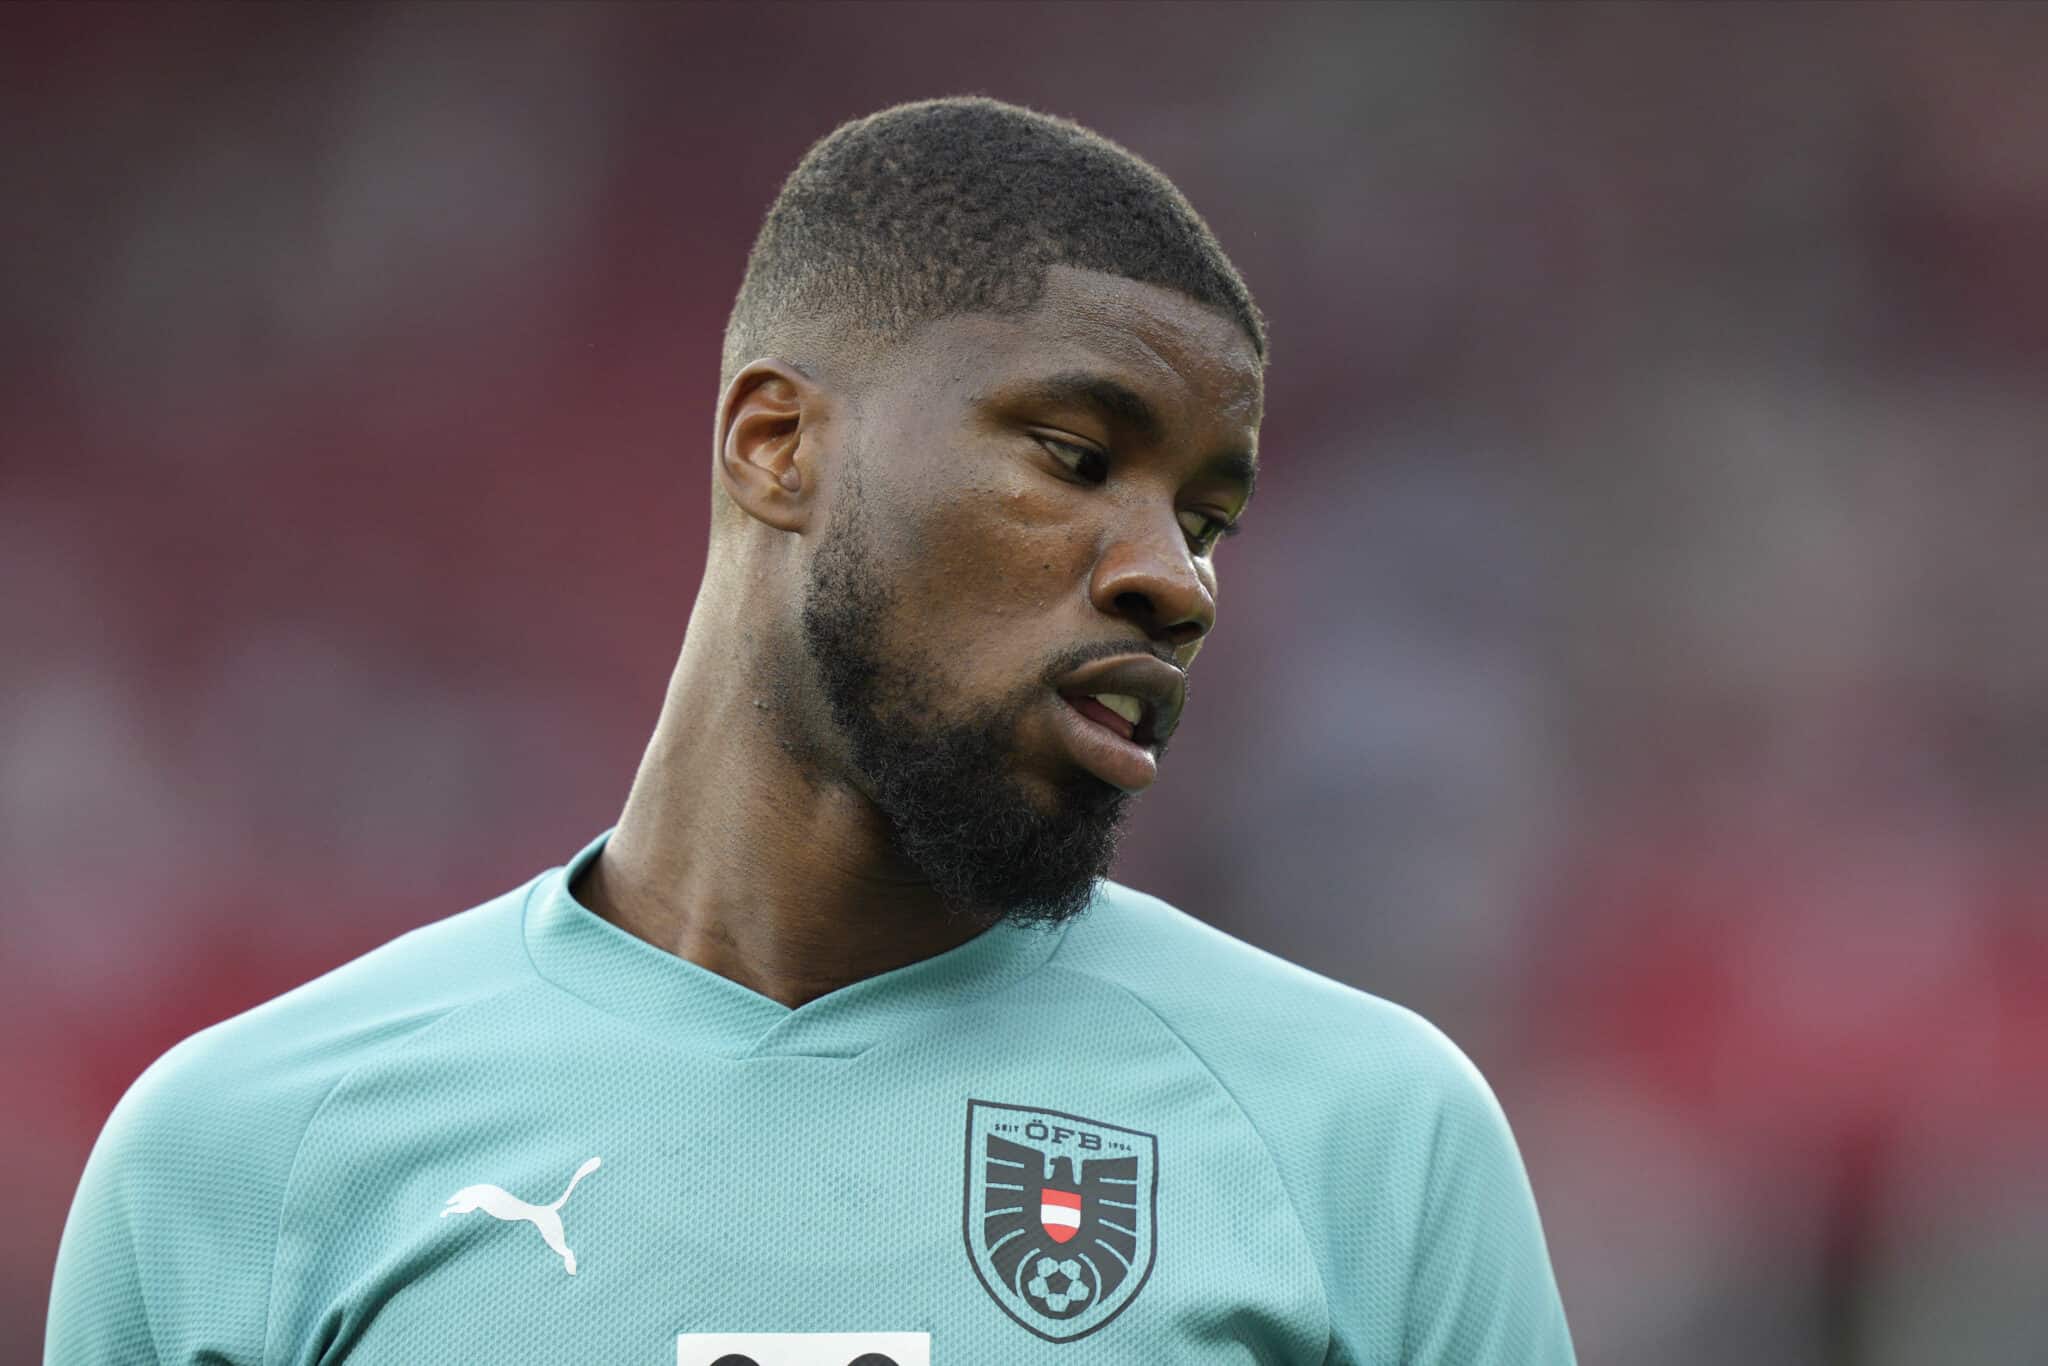 Napoli can kick their search for a new center-back into high gear and have resumed pursuing one of their early targets for the role, Lens’ Kevin Danso.